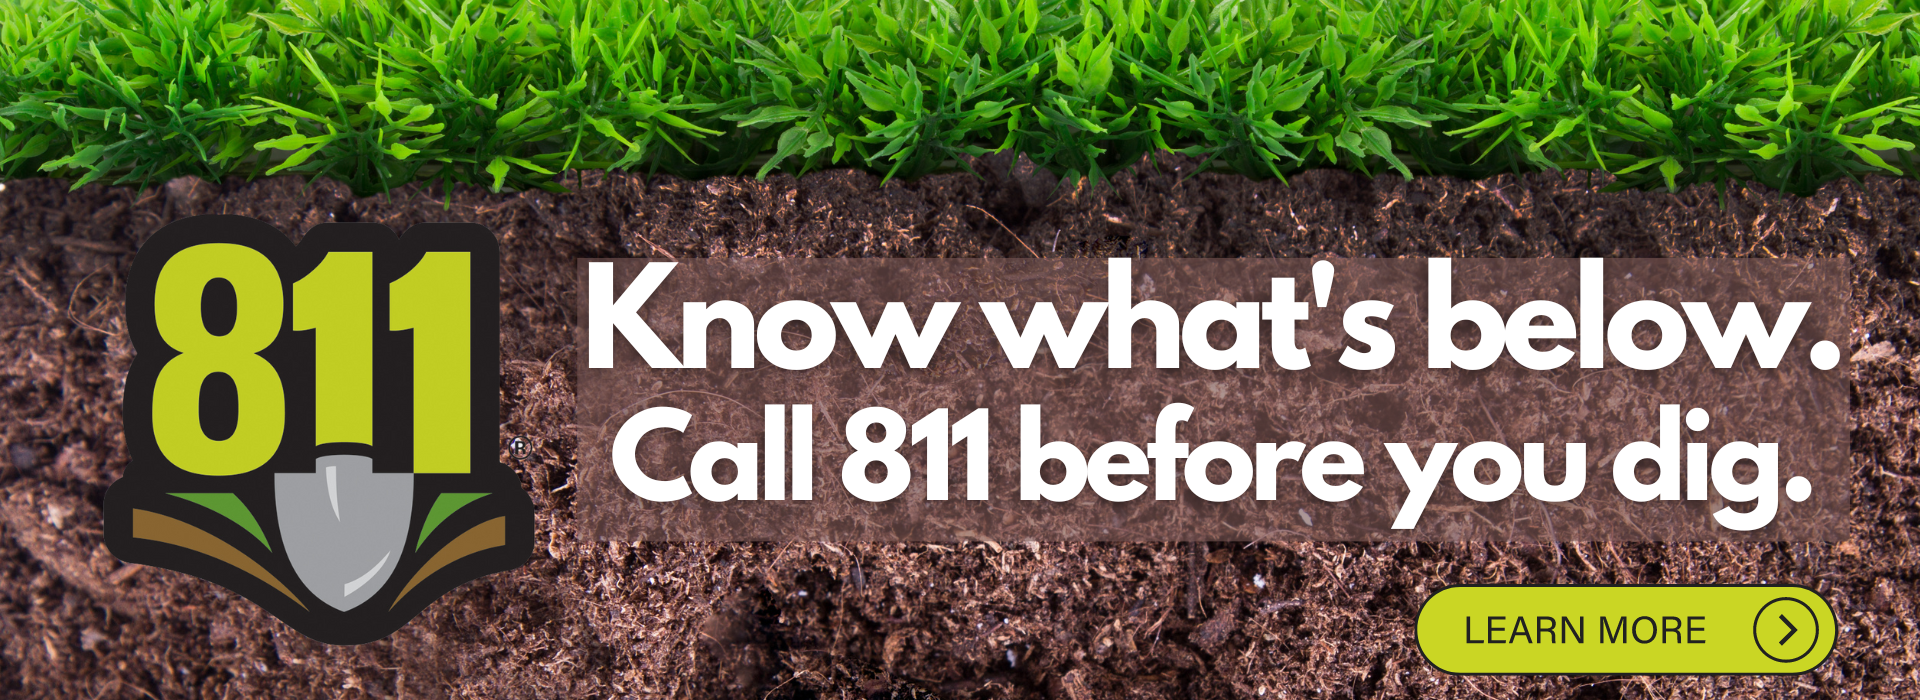 Call before you dig 